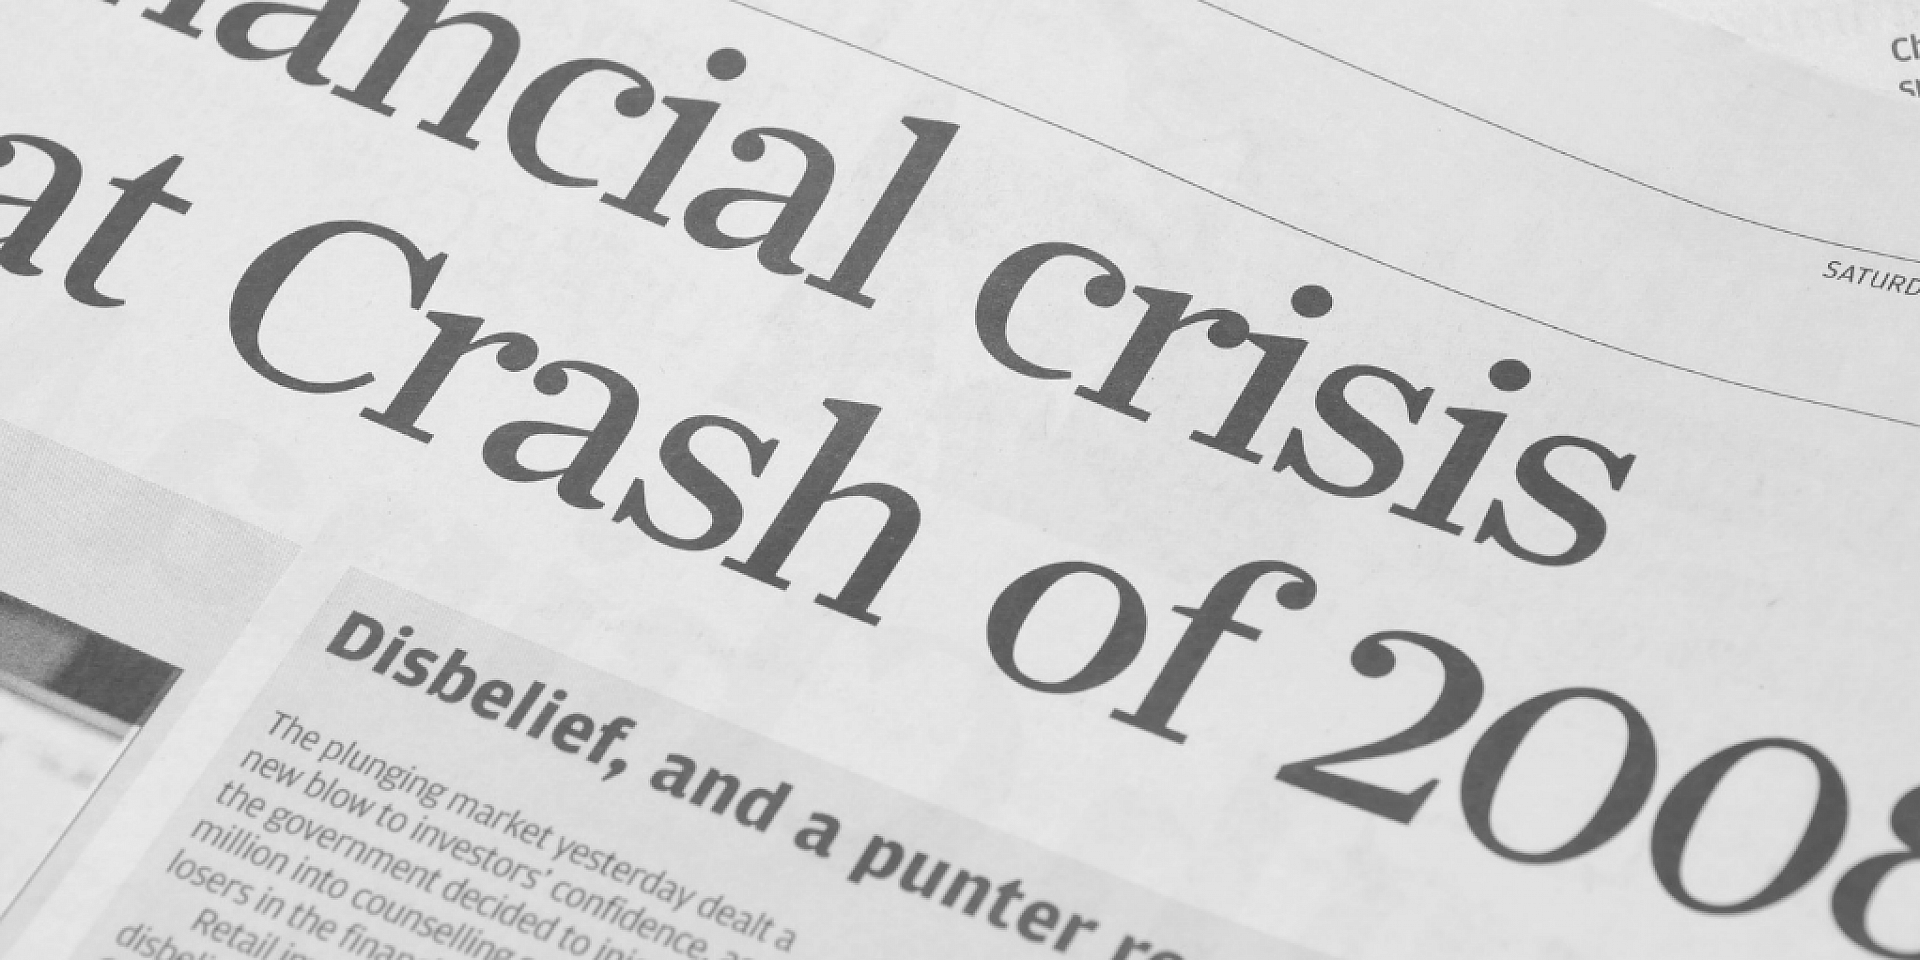 Newspaper clipping with the title "Financial crisis...Crash of 2008"